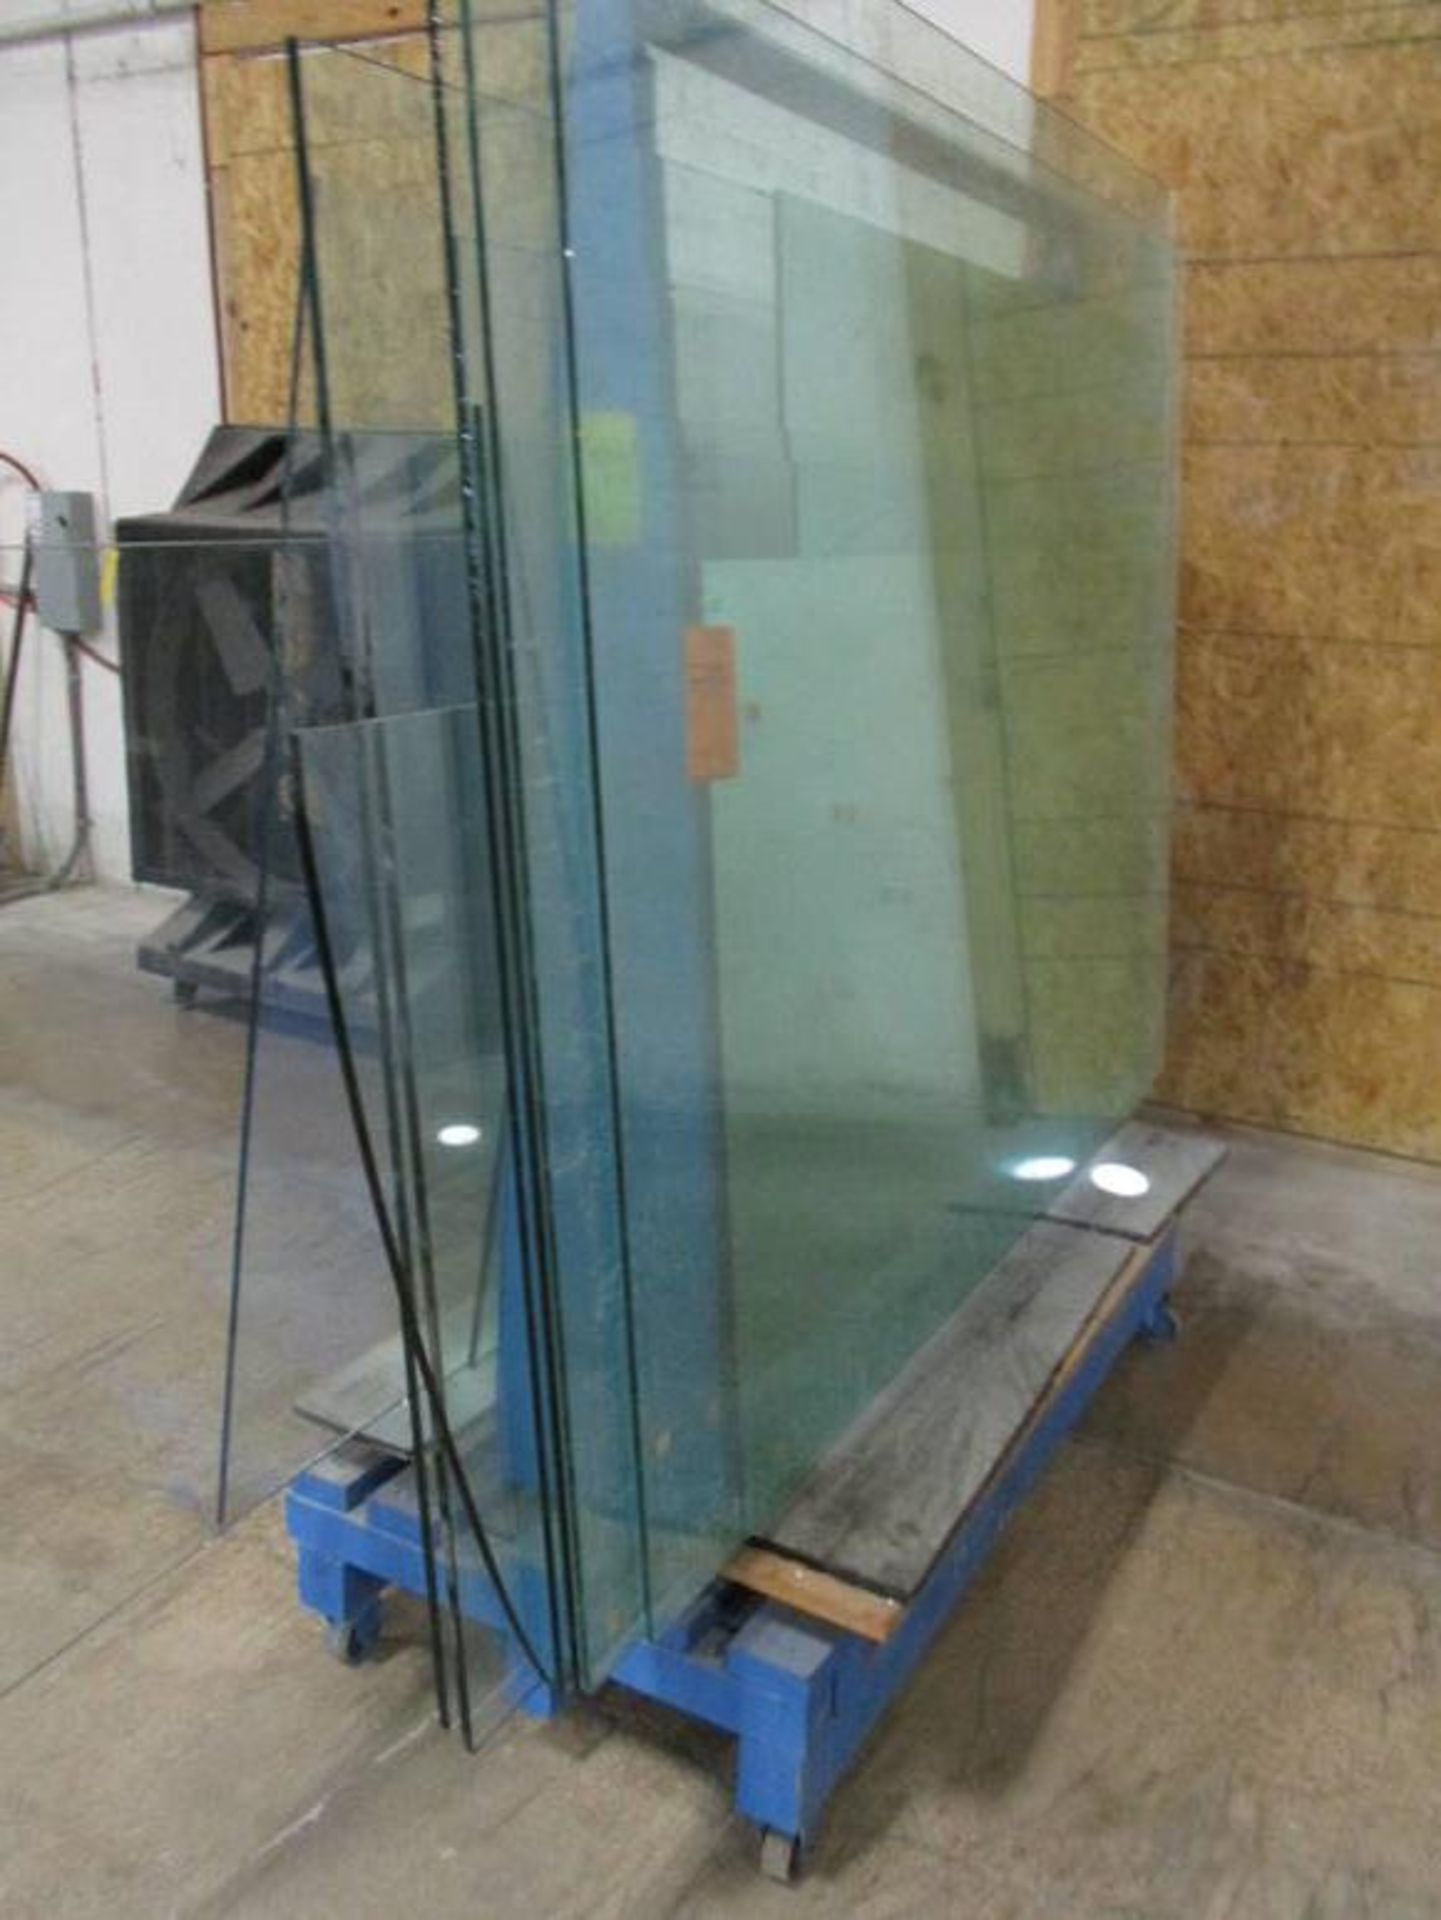 NEOLITH PORTABLE DOUBLE SIDED GLASS RACK, APPROX 4' X 6' 7' W/ (13) VARIOUS SIZE GLASS - Image 2 of 3